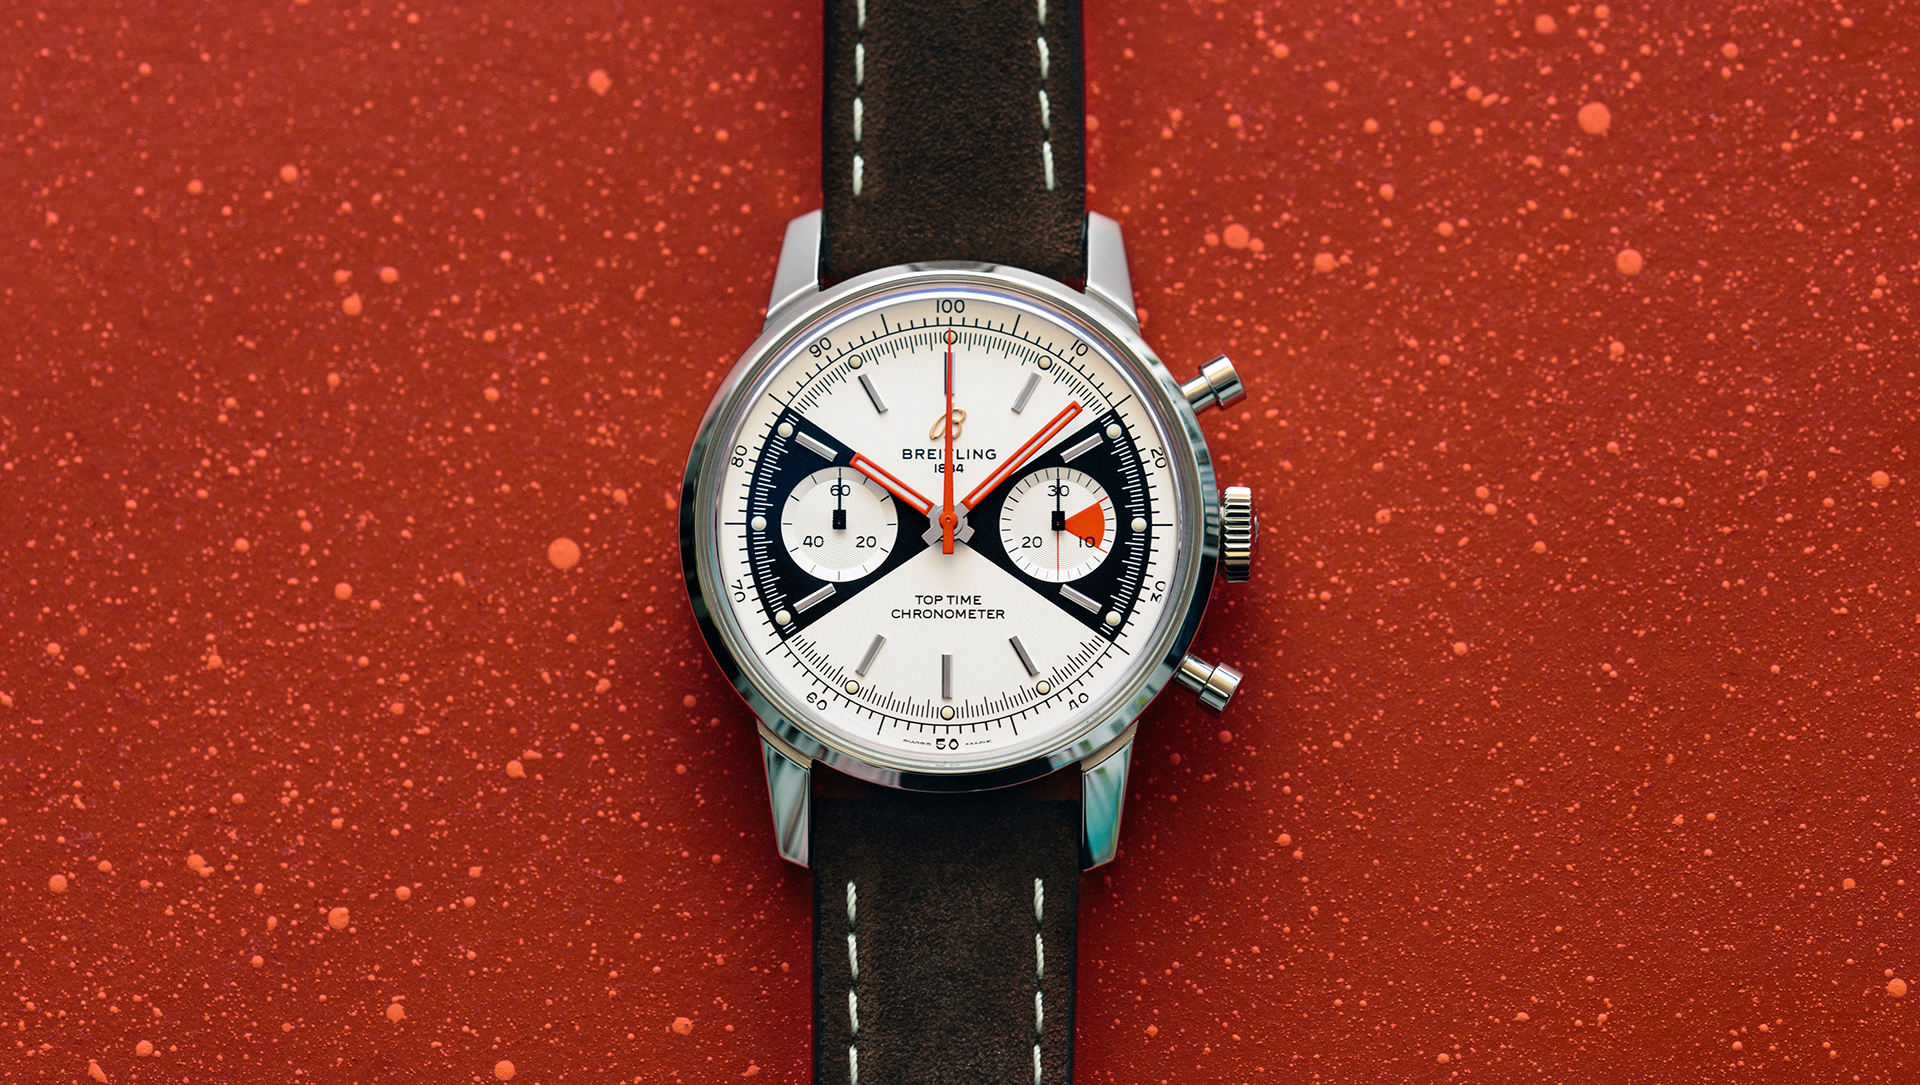 Breitling Revives A 1960s Classic With New Top Time Limited Edition